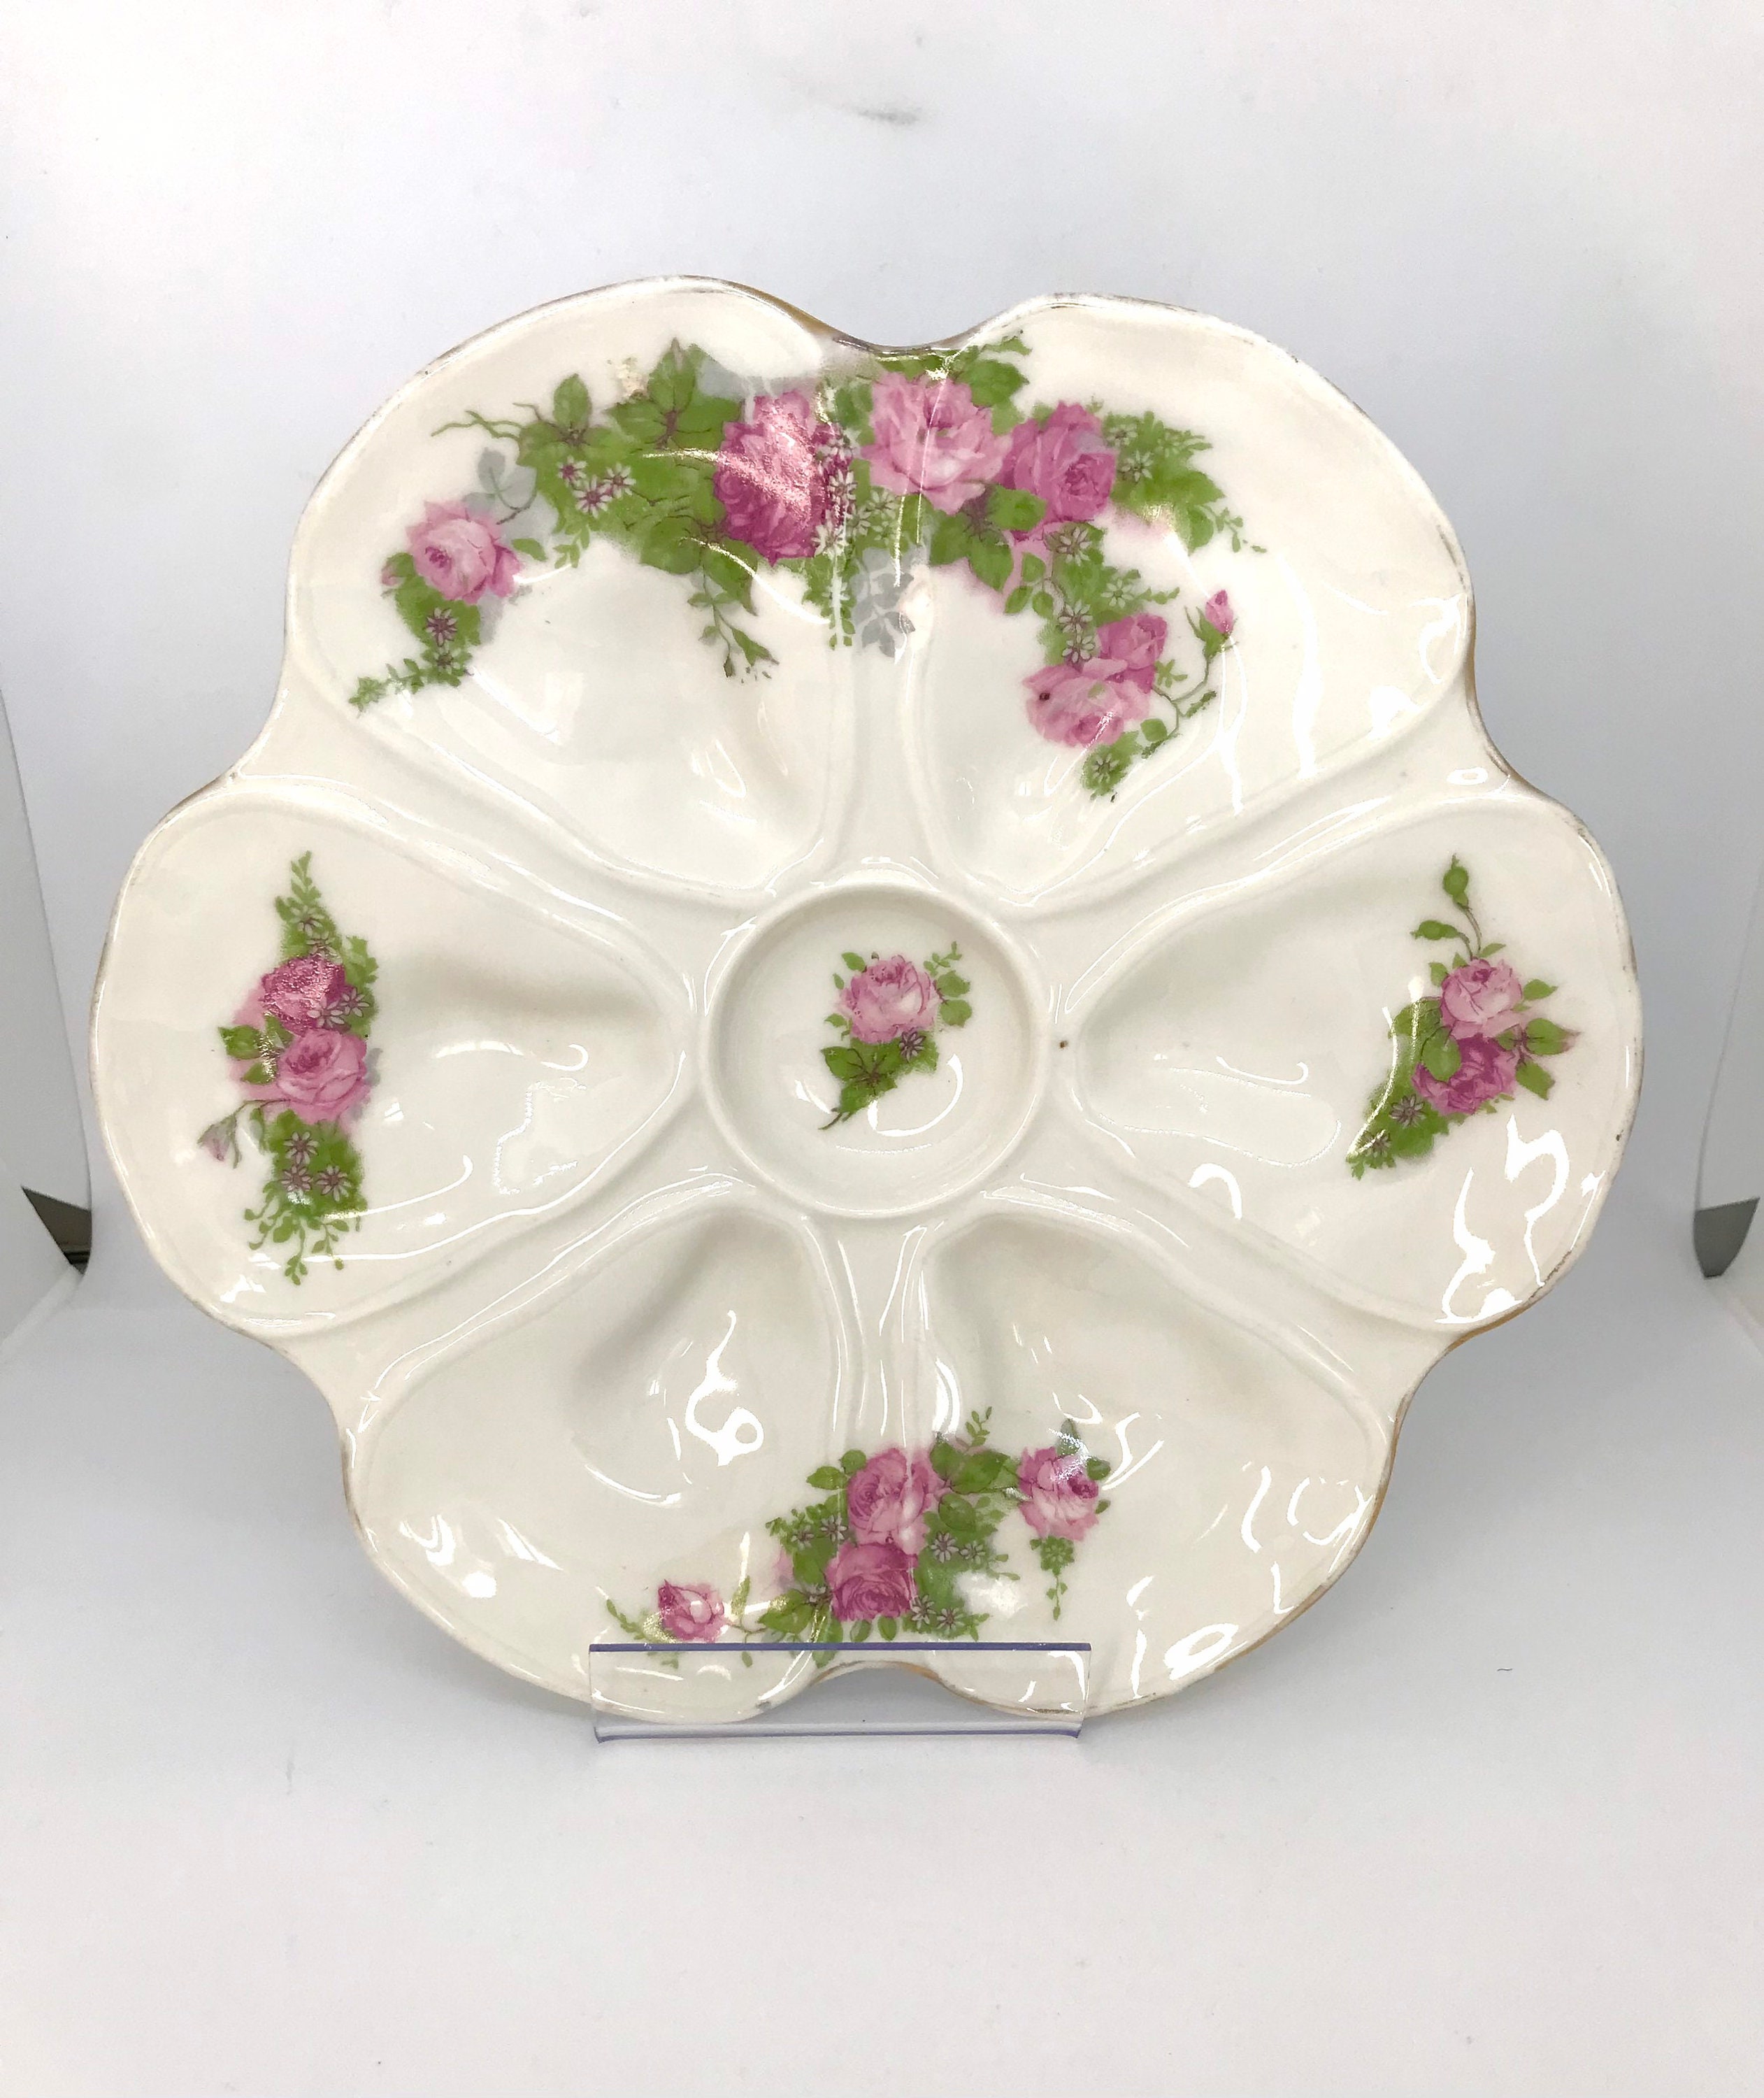 Beautiful Limoges Old Oyster Plate French Porcelain Majolica Flowers Roses No Haviland Mf